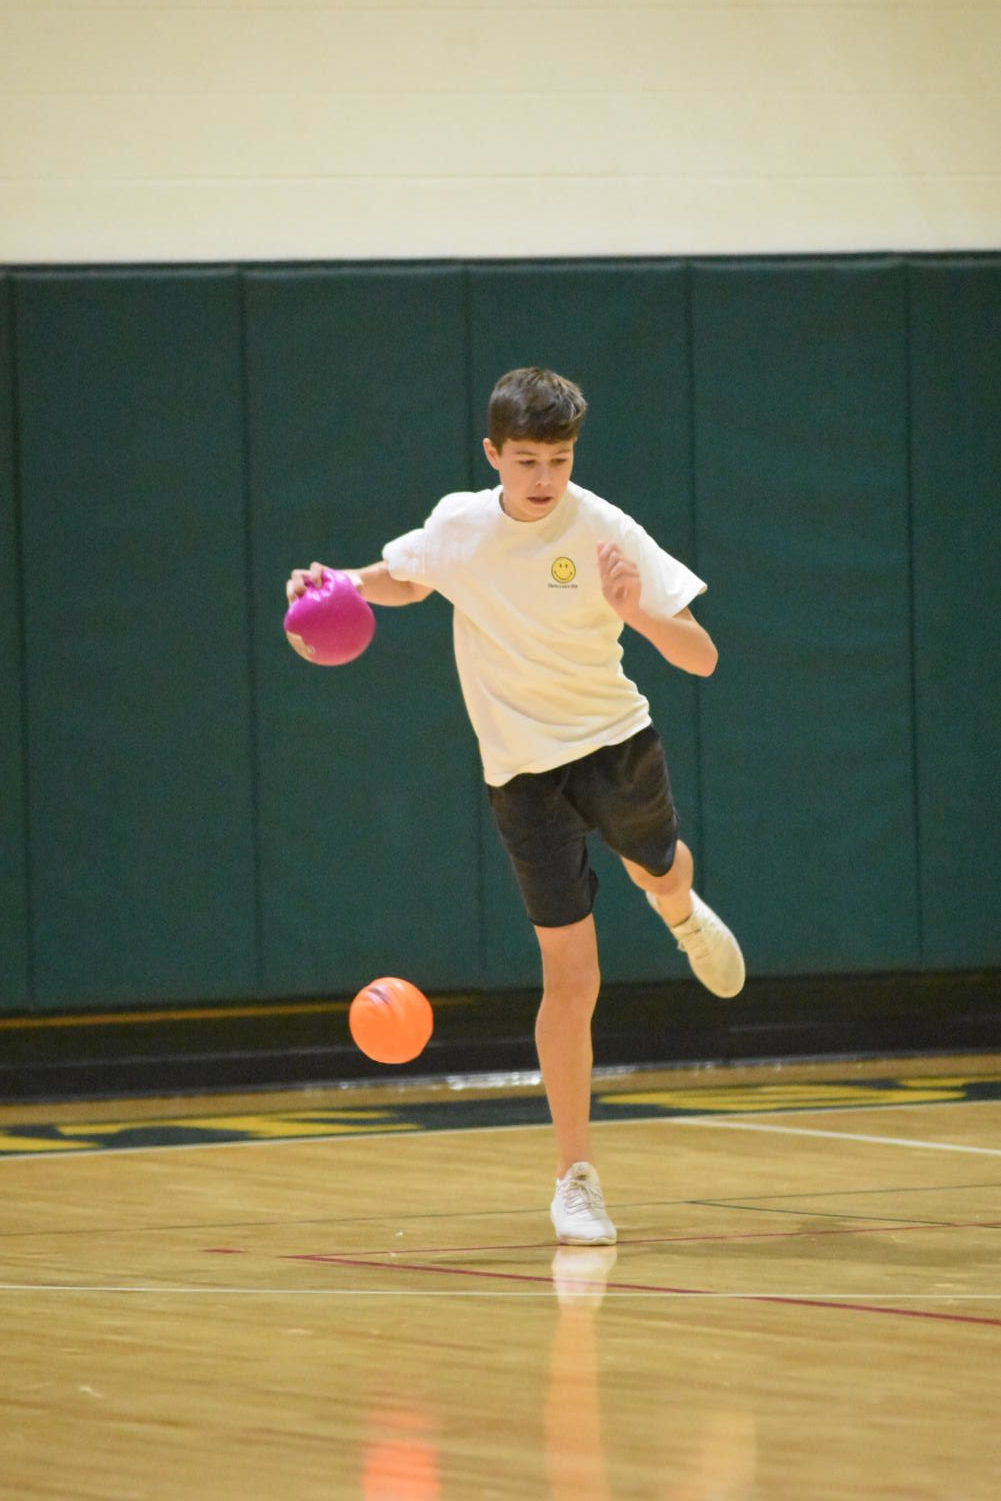 Gallery+of+the+Day%3A+StuCo+Dodgeball+Tournament+close-ups